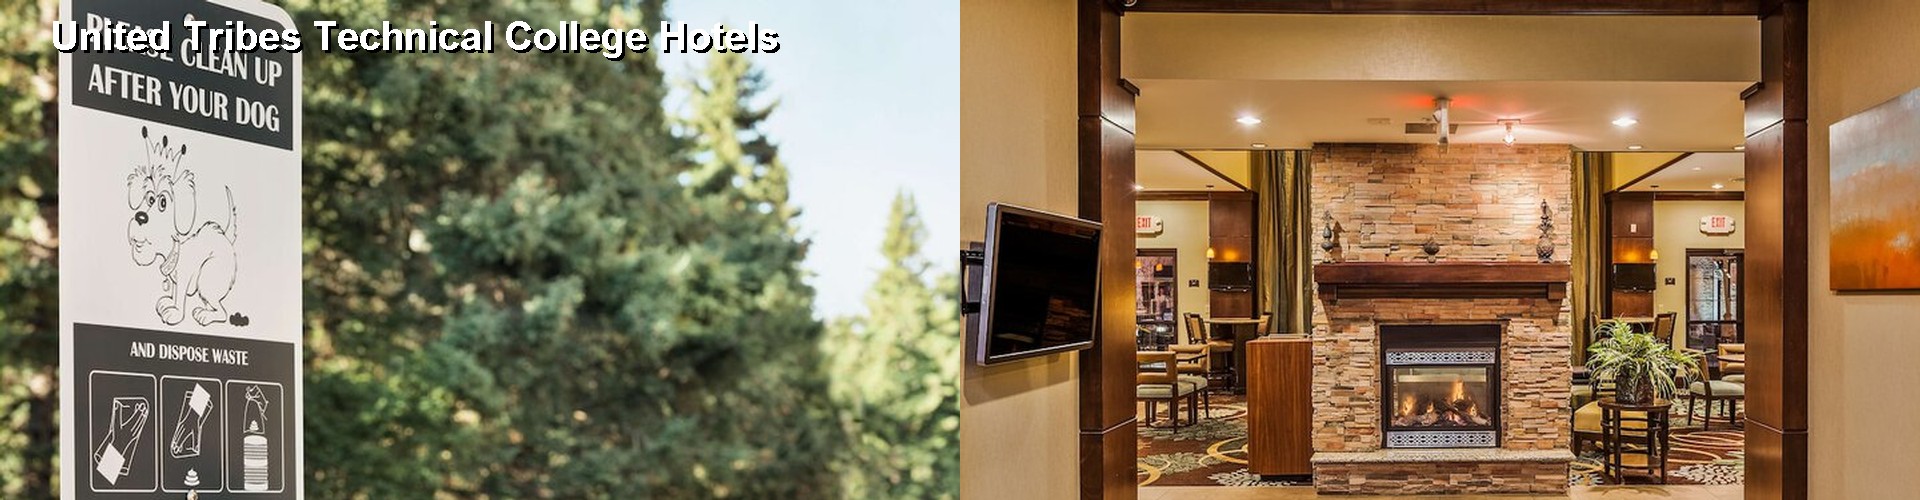 5 Best Hotels near United Tribes Technical College